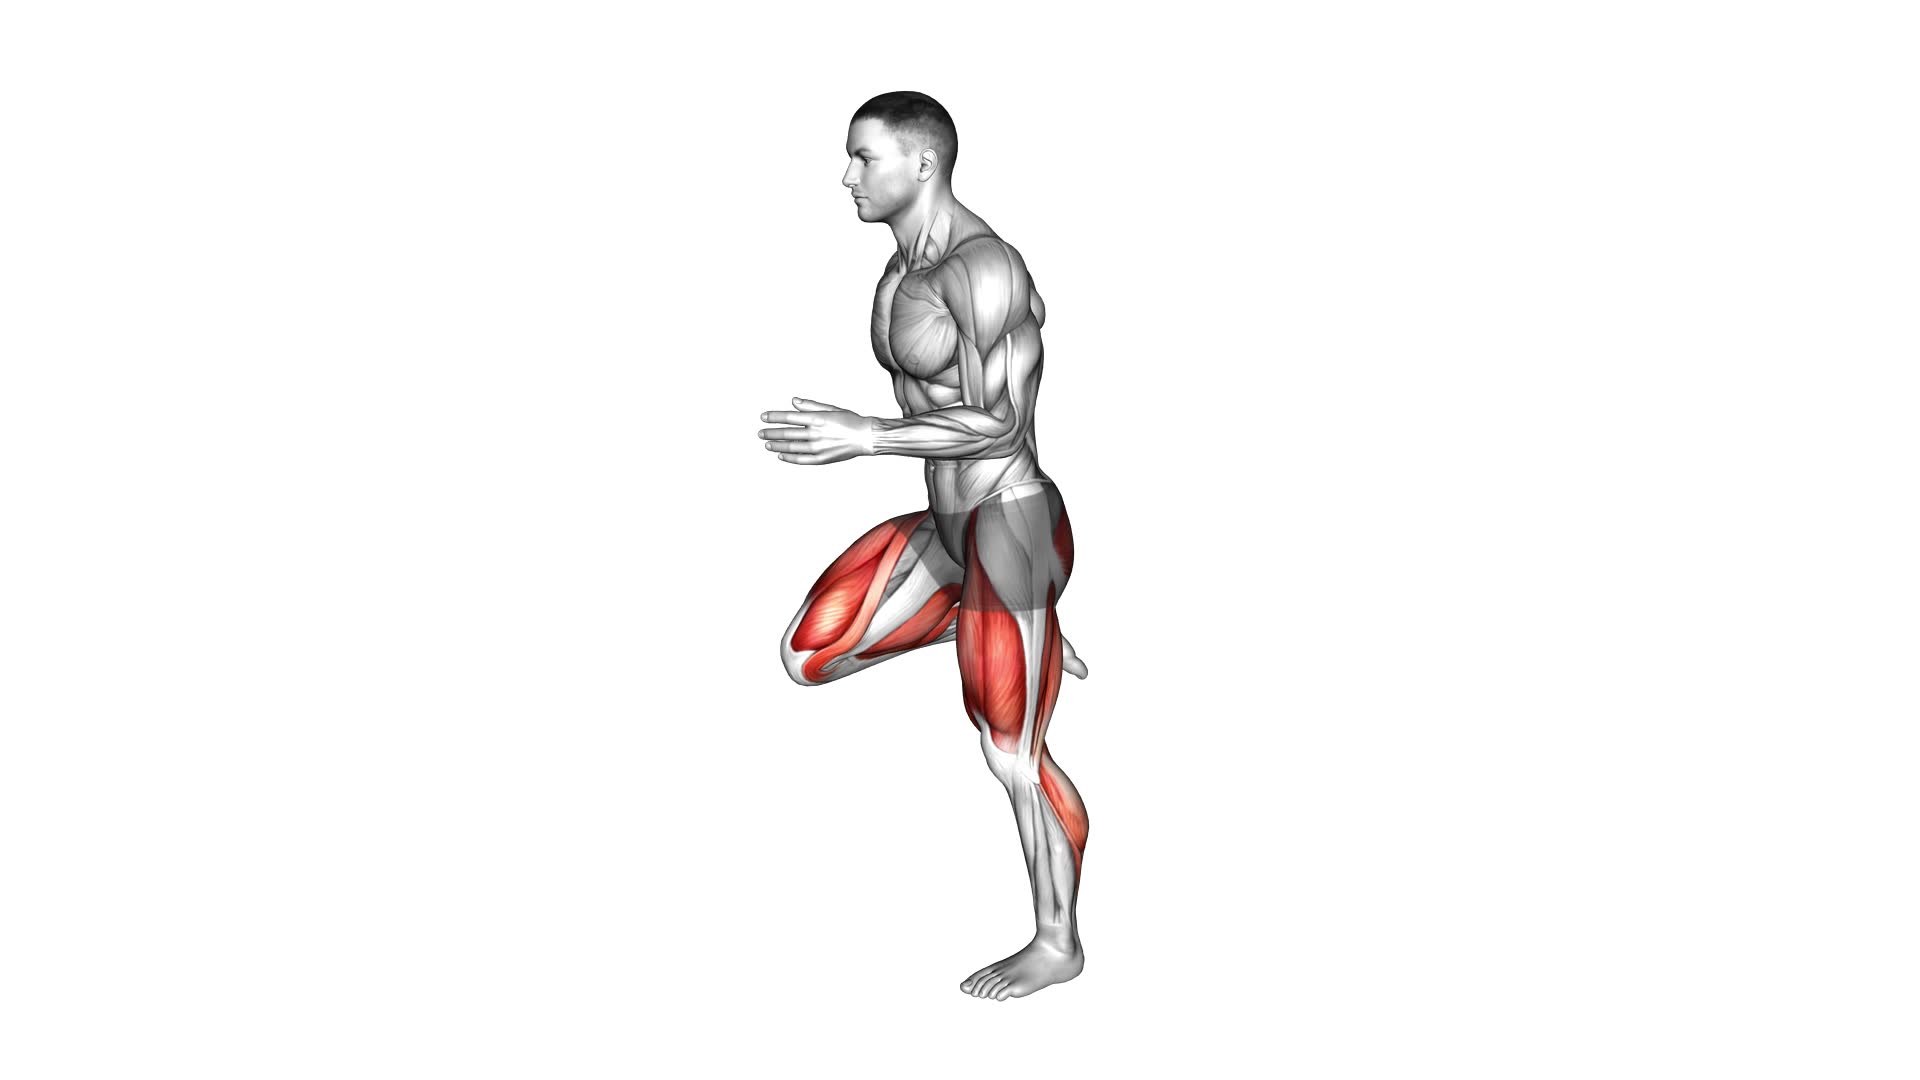 High Knee to Butt Kick - Video Exercise Guide & Tips